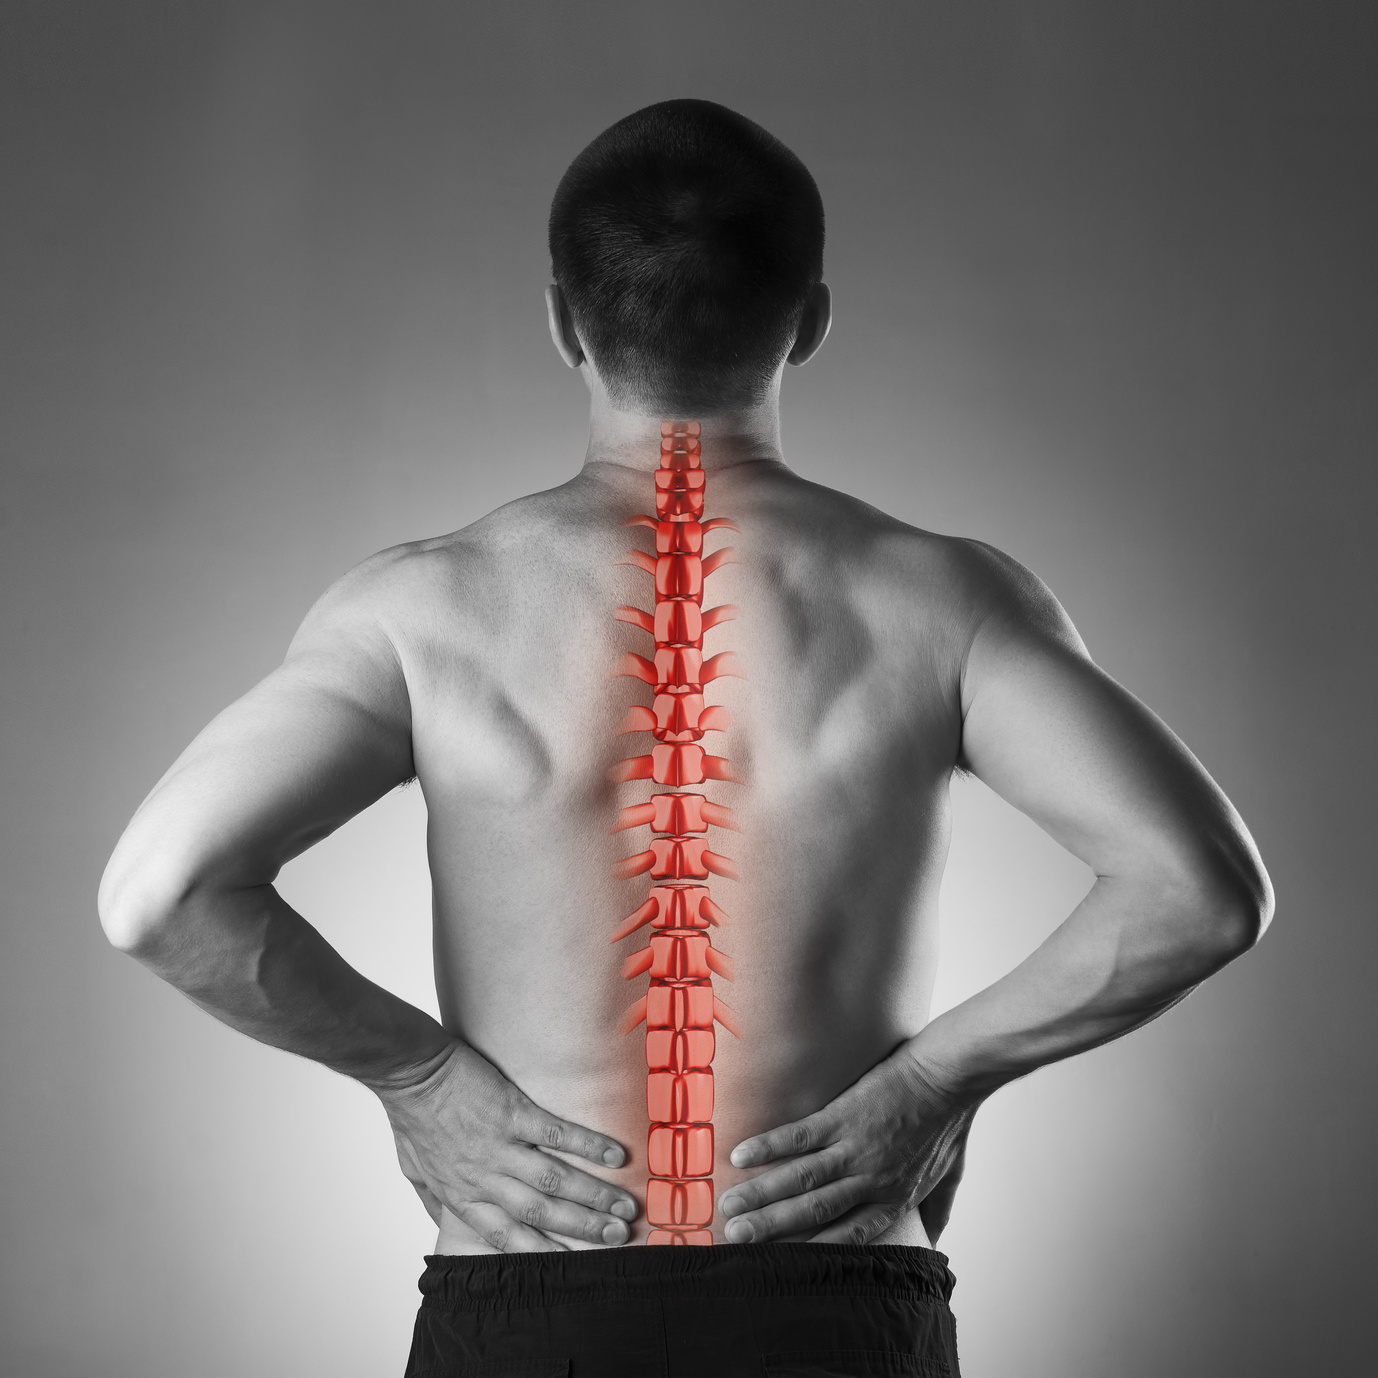 Spine pain